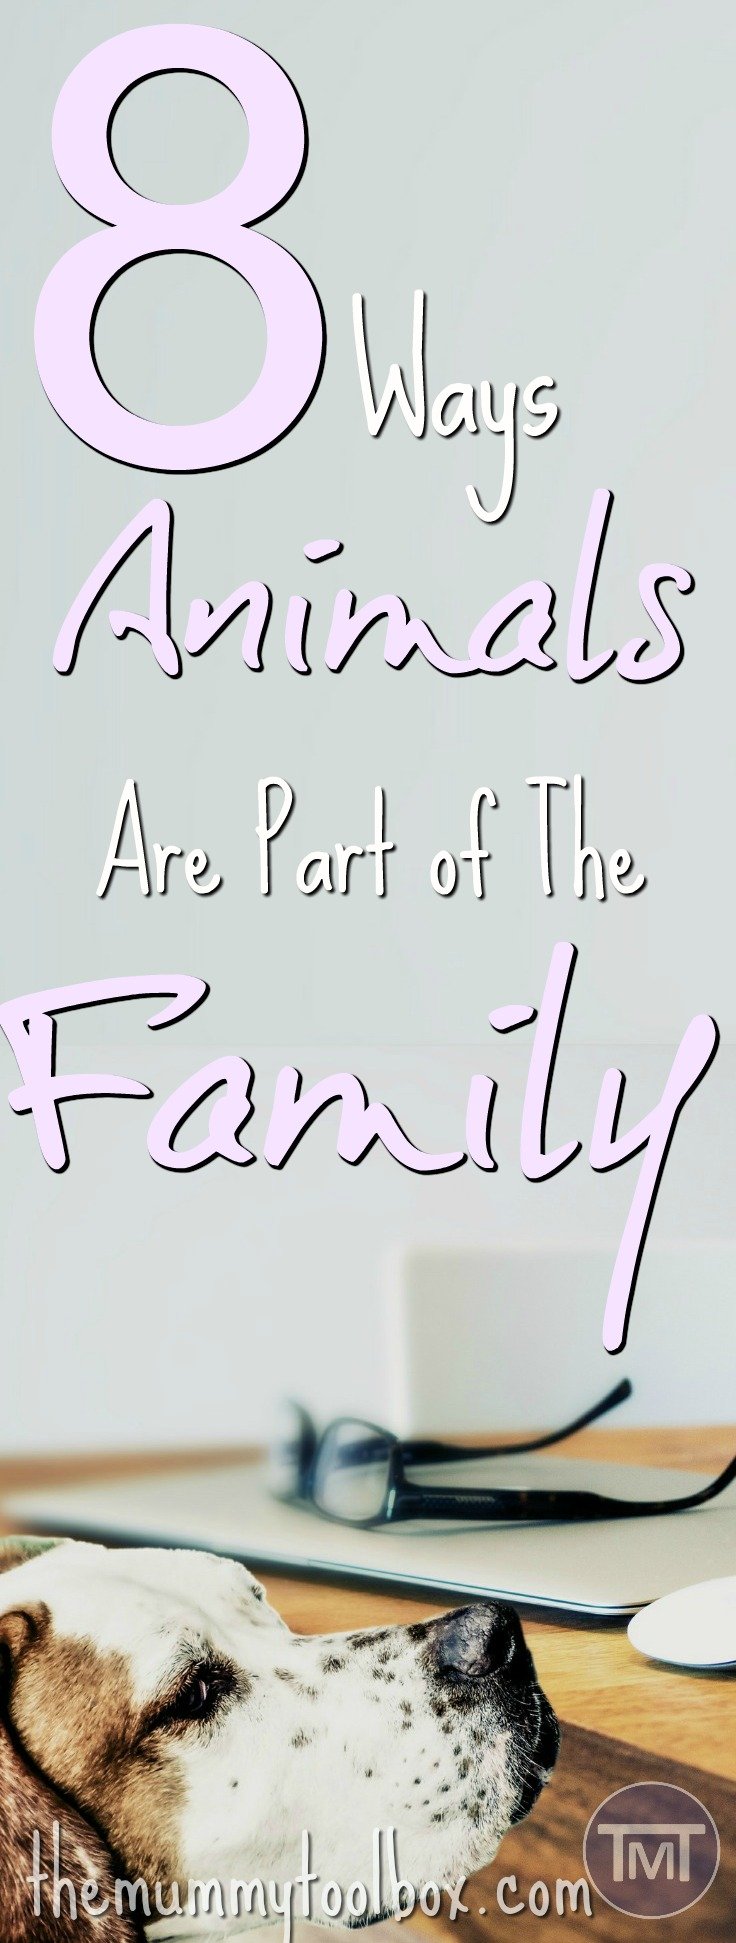 8-ways-animals-are-part-of-the-family-pinterest-image